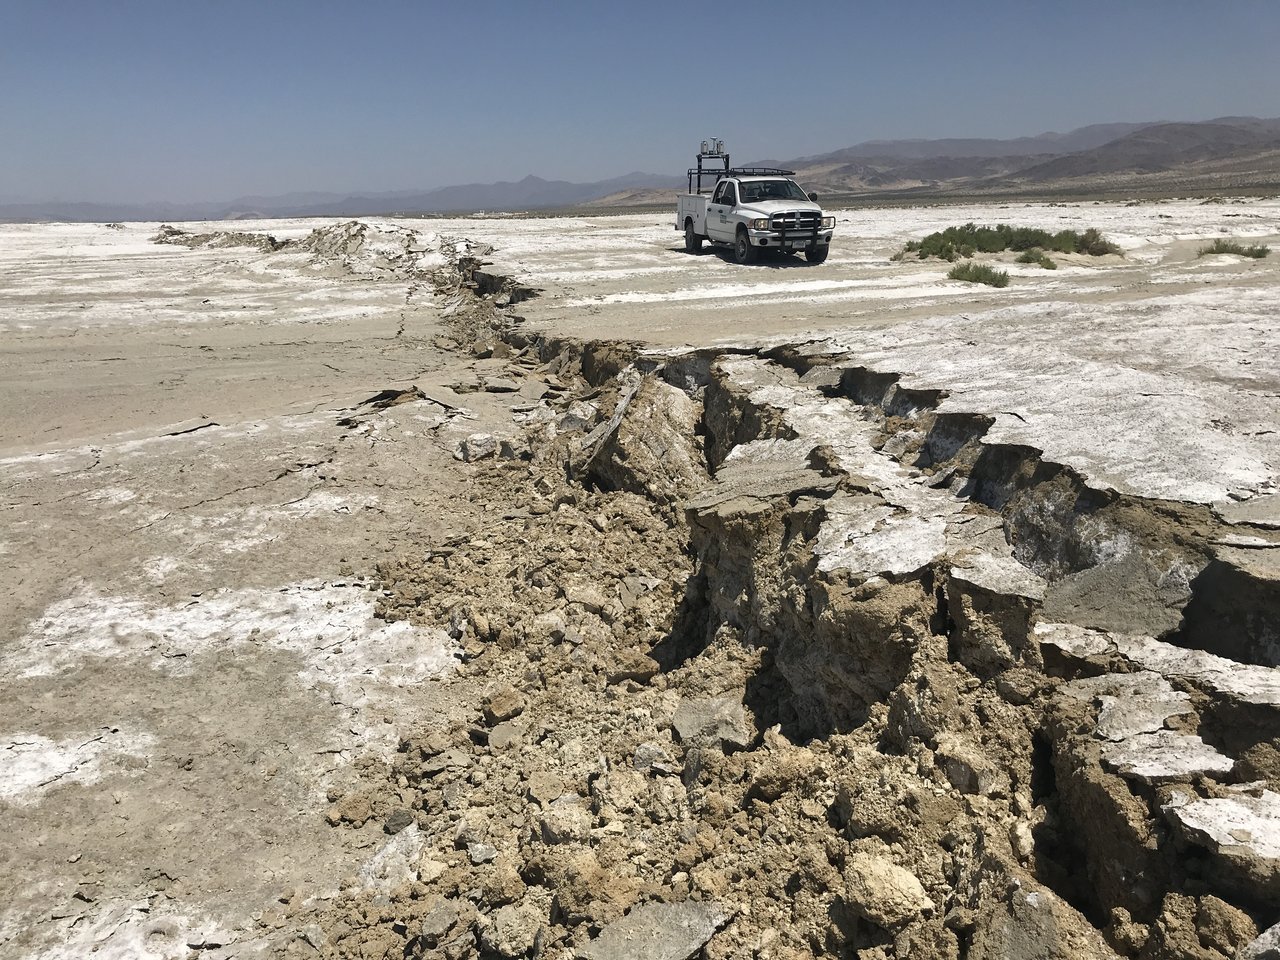 Can Climate Affect Earthquakes, Or Are the Connections Shaky?